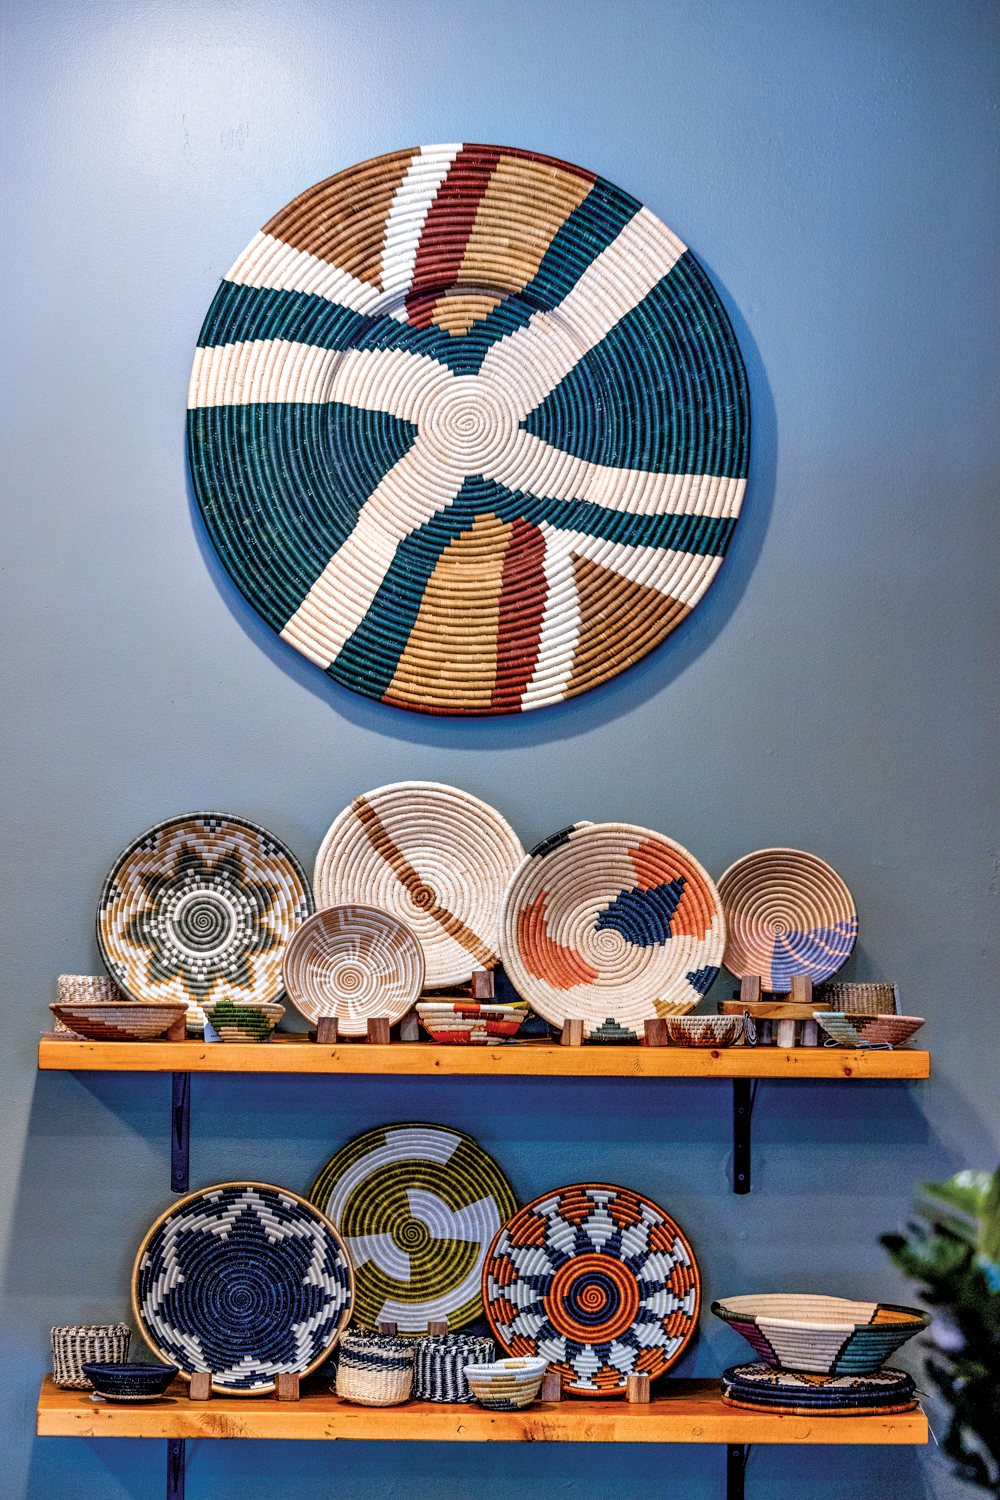 Multicolored coiled-rope bowls and dishes against a blue wall